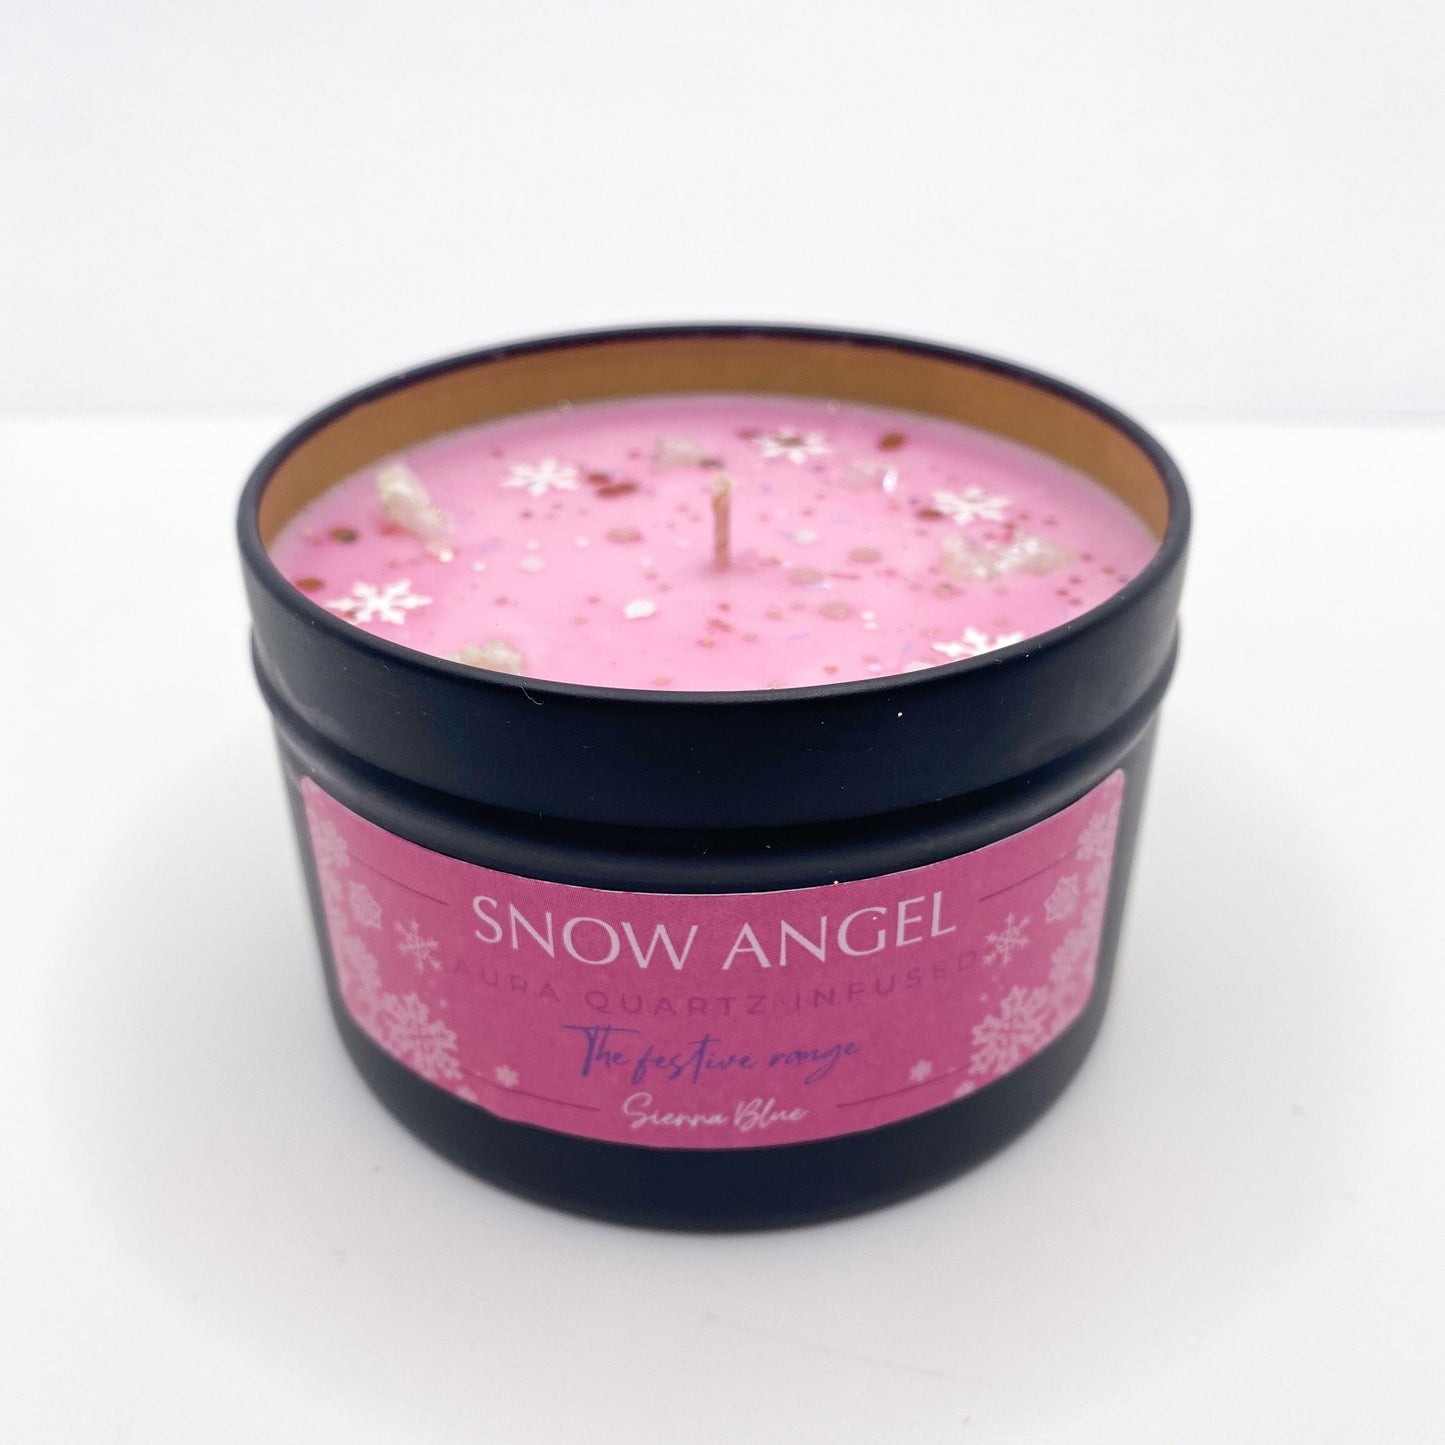 Snow Angel candle